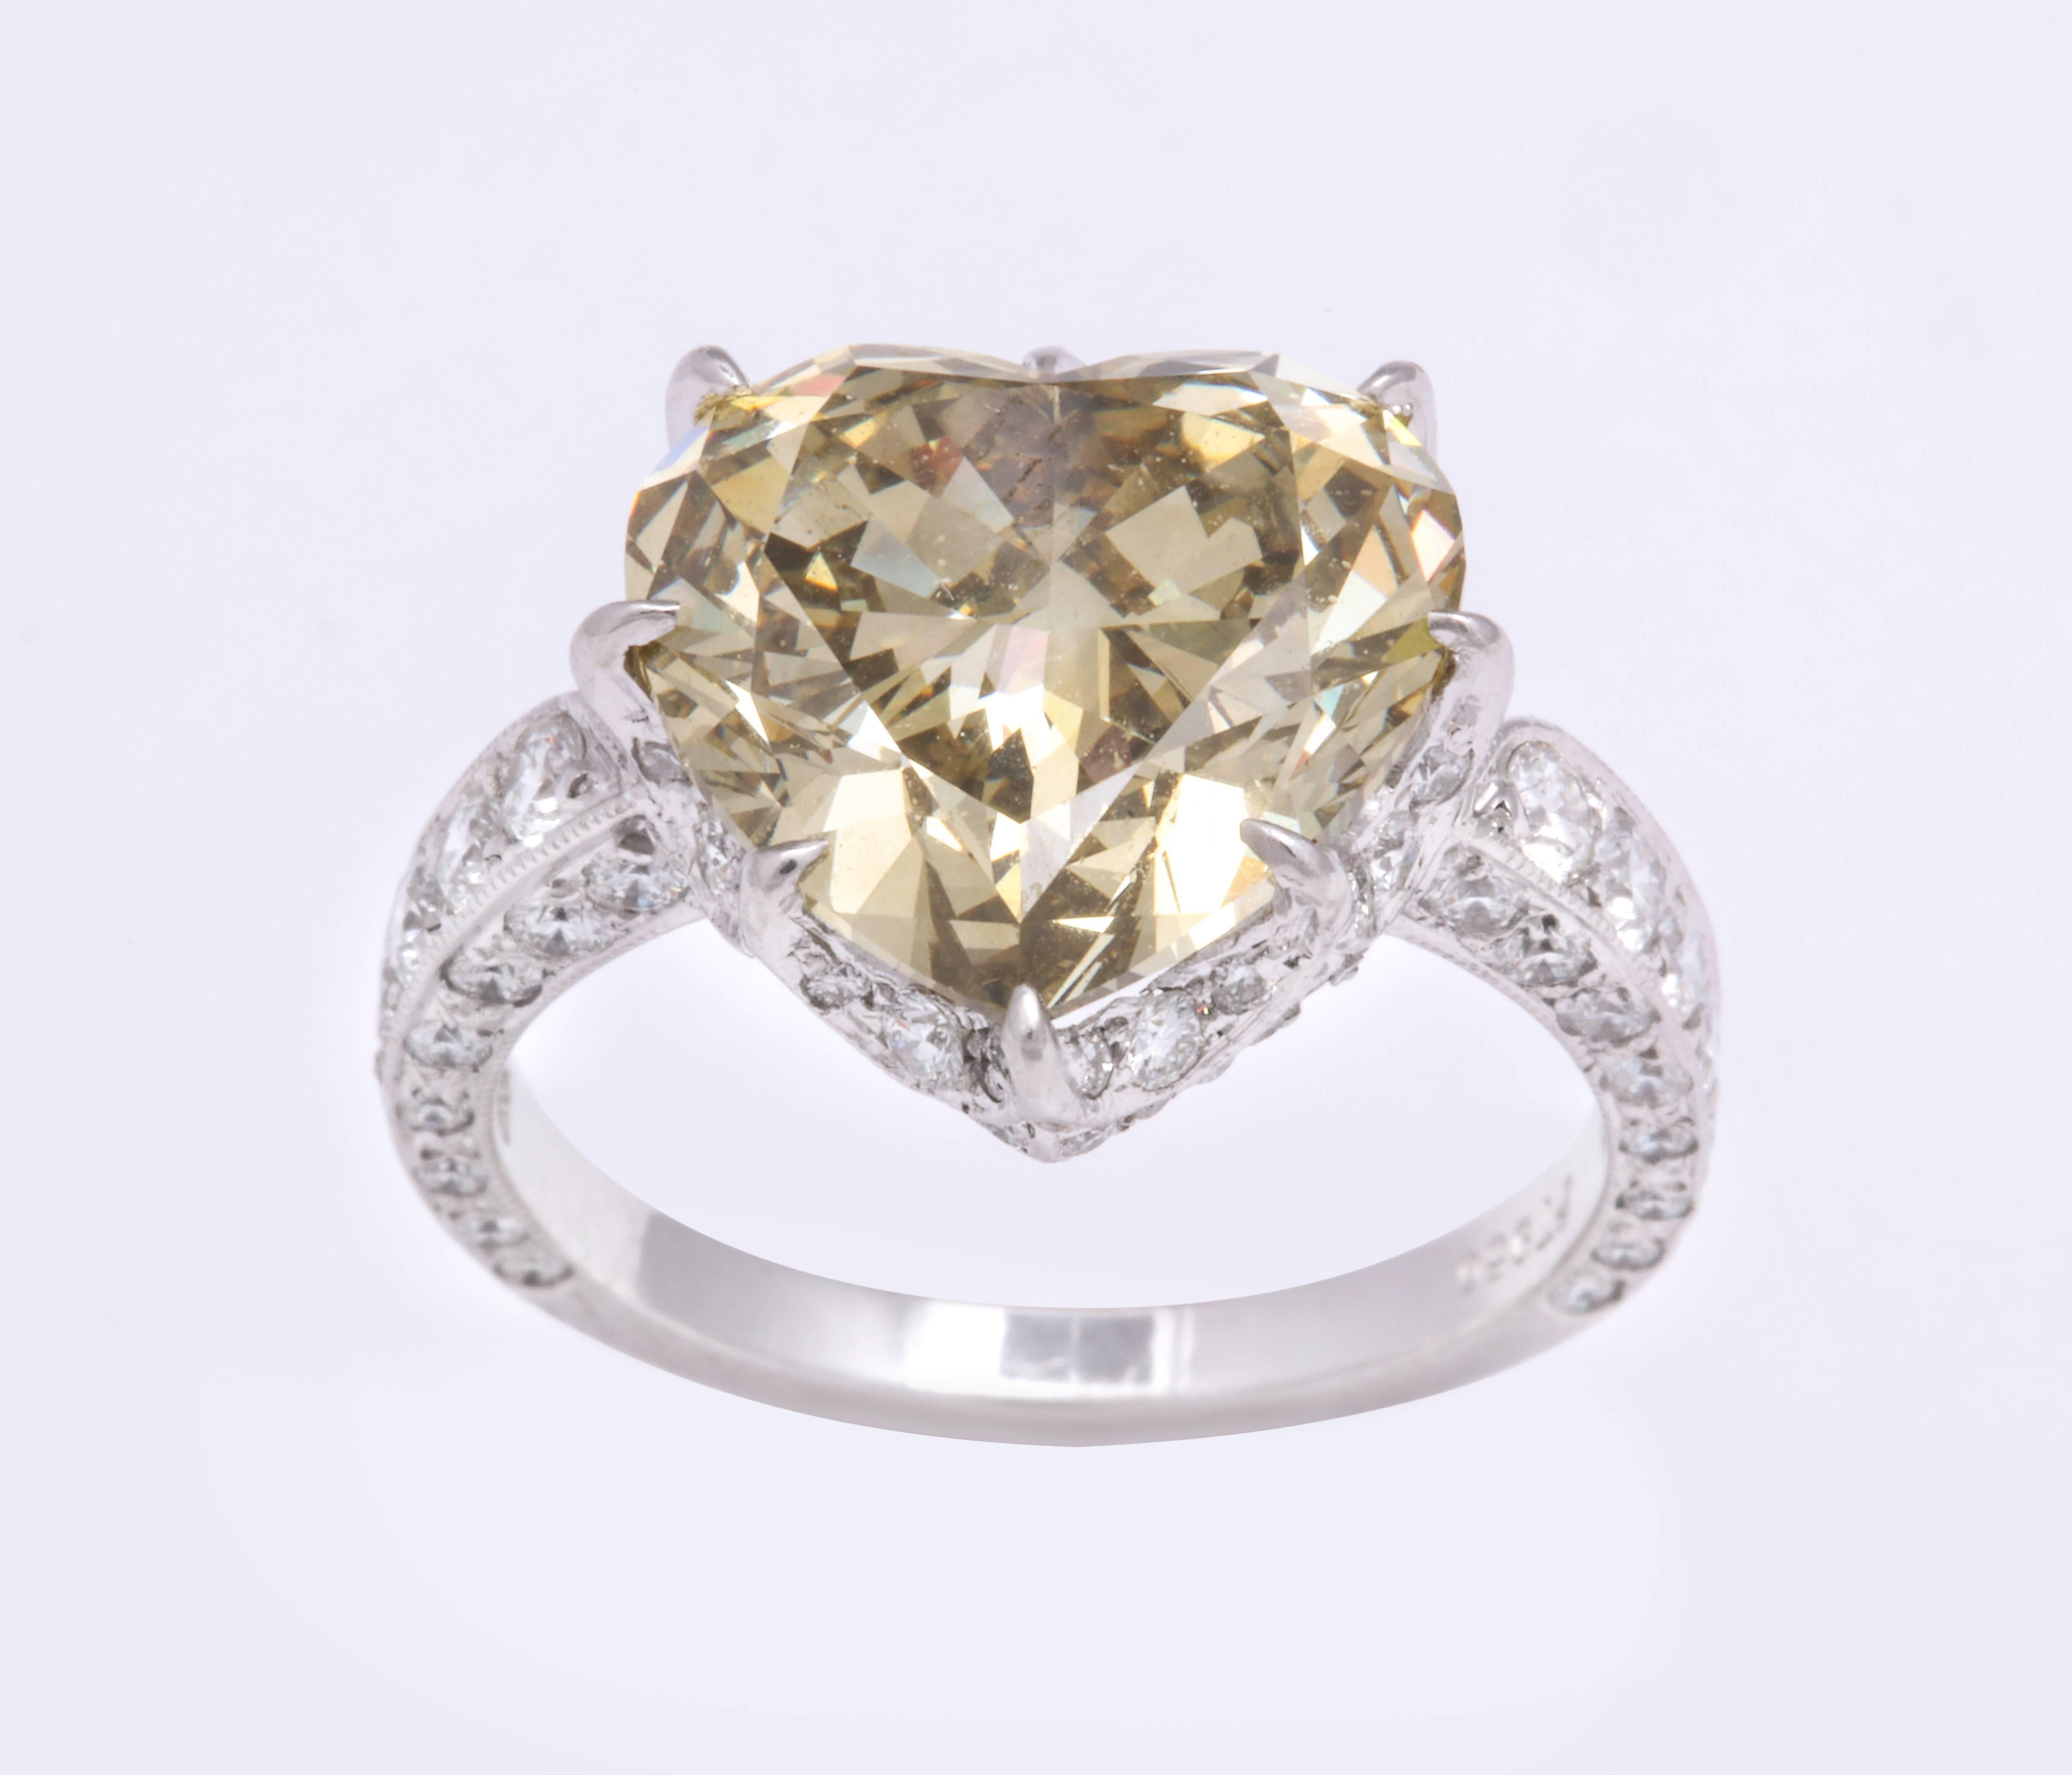 GIA Certified 5.77 Carat Heart-Shaped Diamond and Platinum Ring For Sale 1